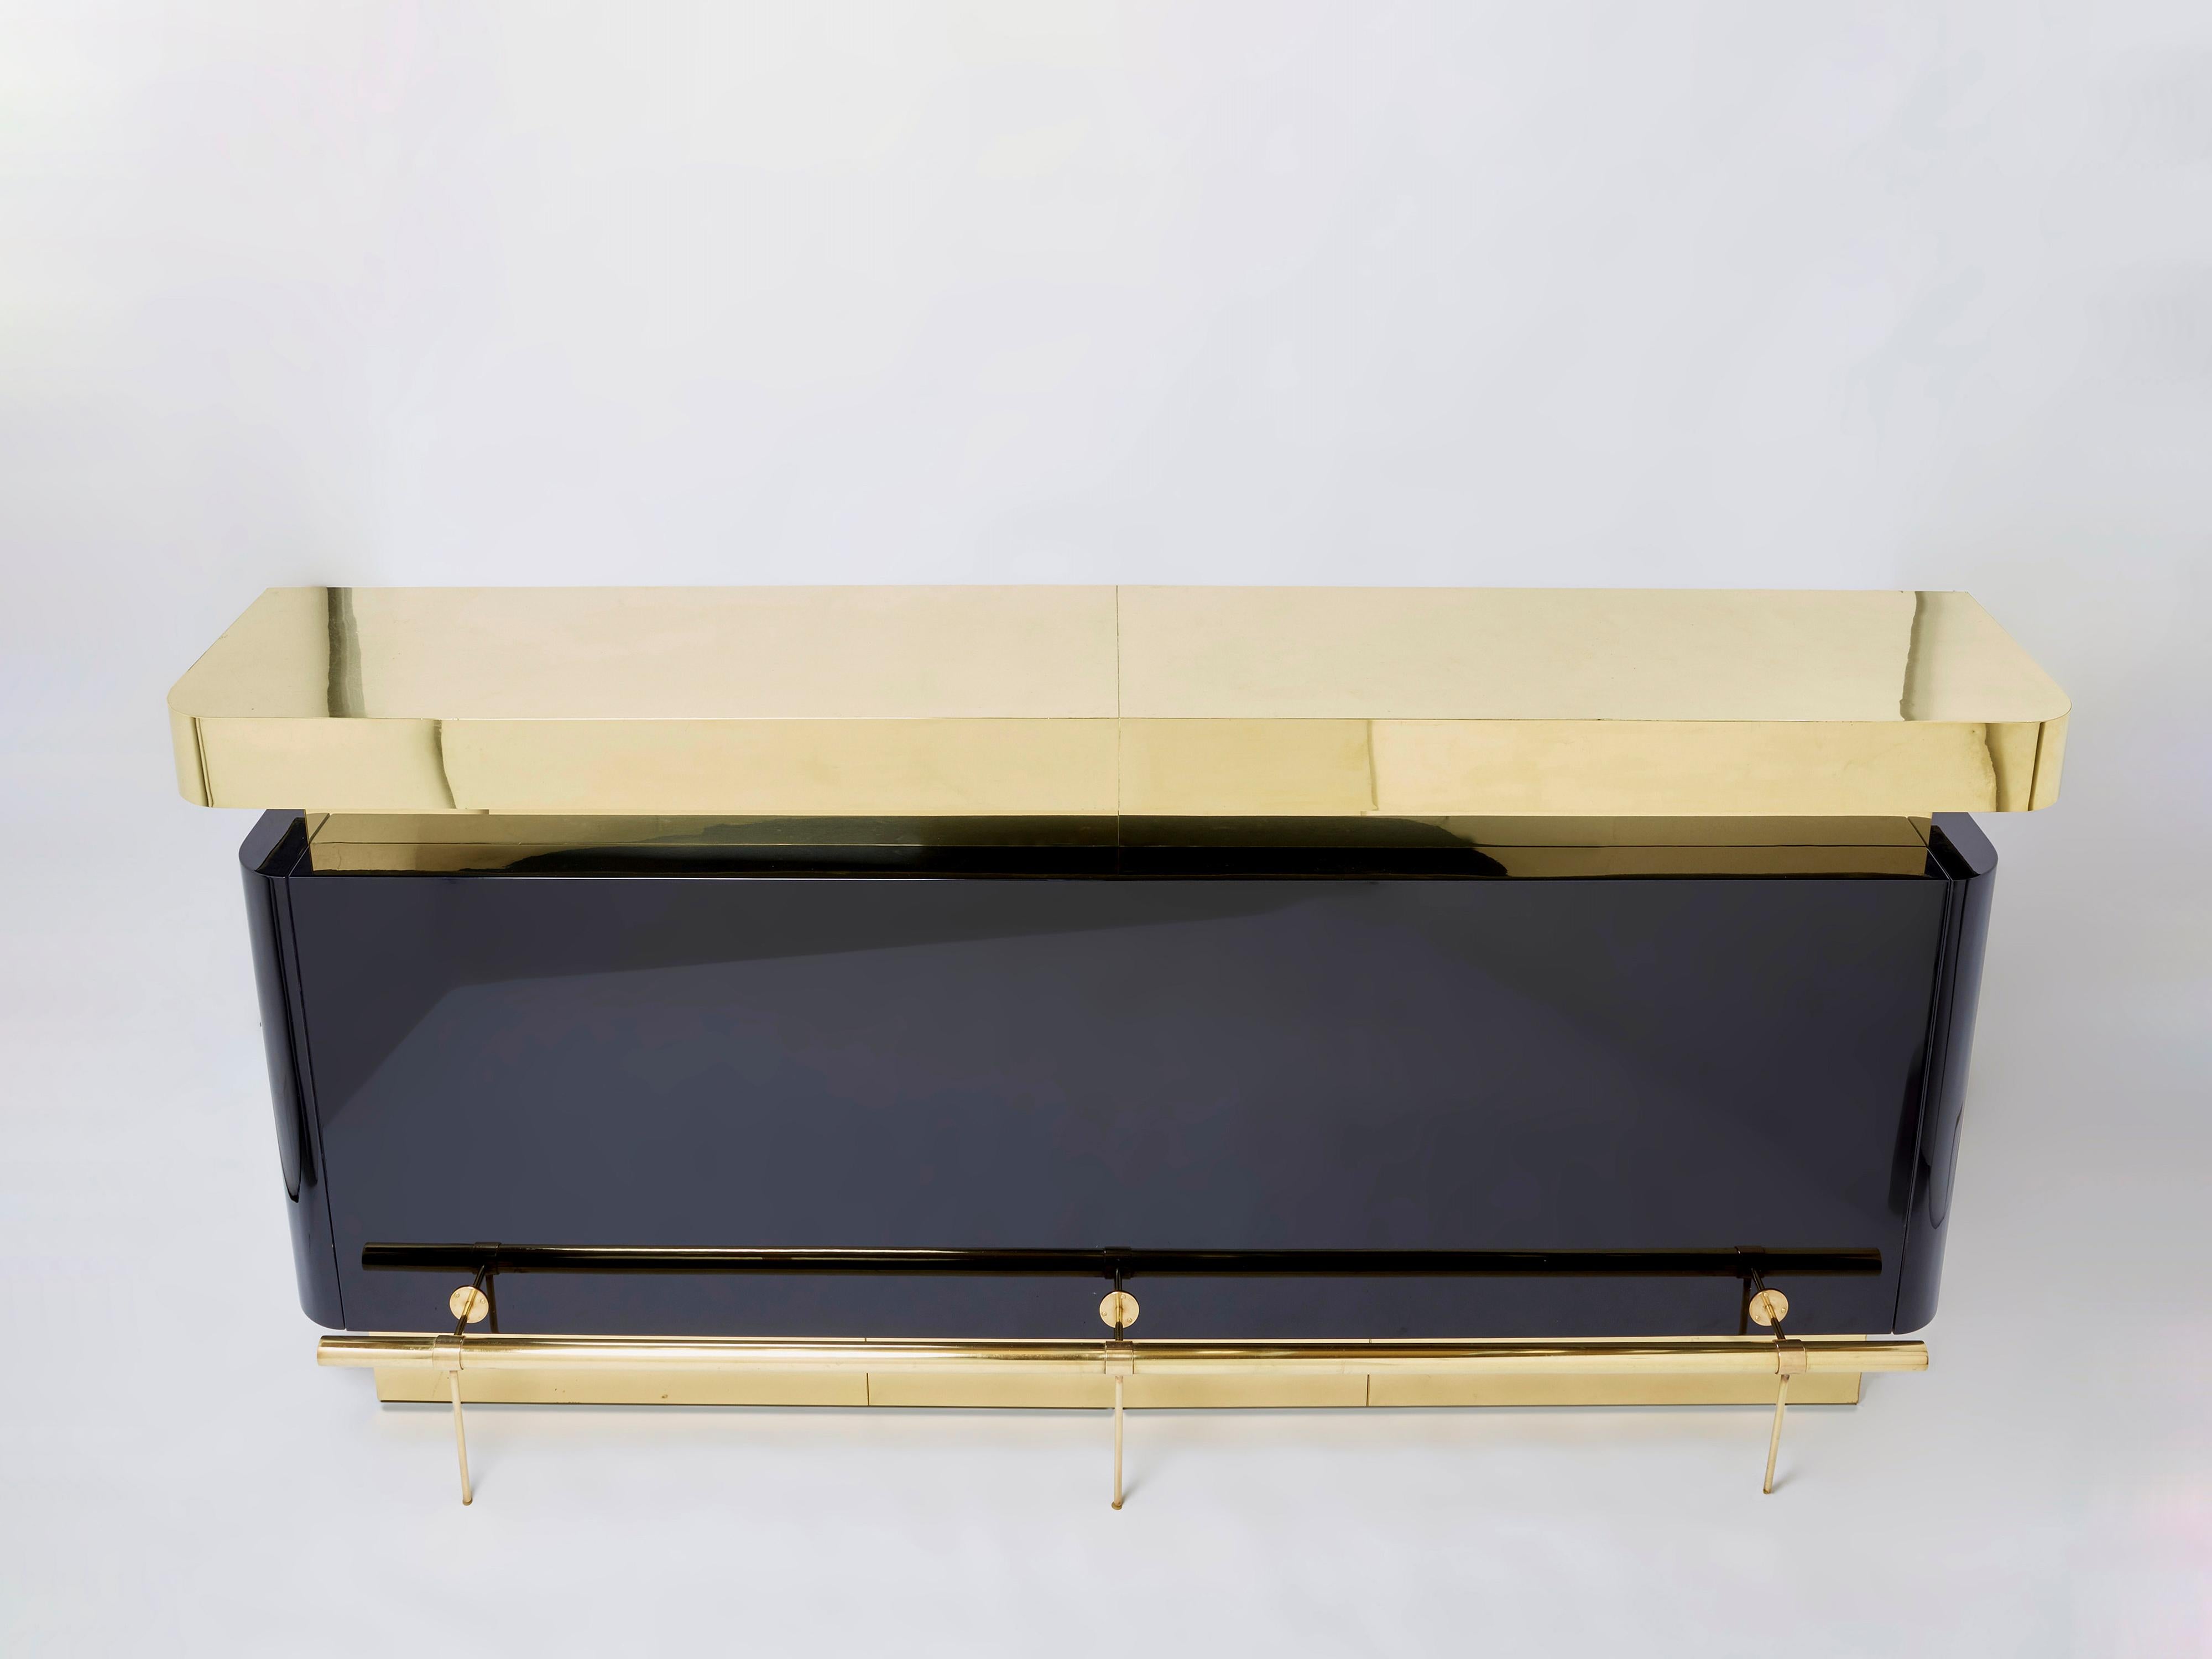 A unique bar for a standout look. This rare piece was designed by Jean-Claude Mahey in the 1970s for Maison Romeo Paris, and displays all the trademark glam of the French seventies period. Brass and black lacquer are used in large, chunky blocks for